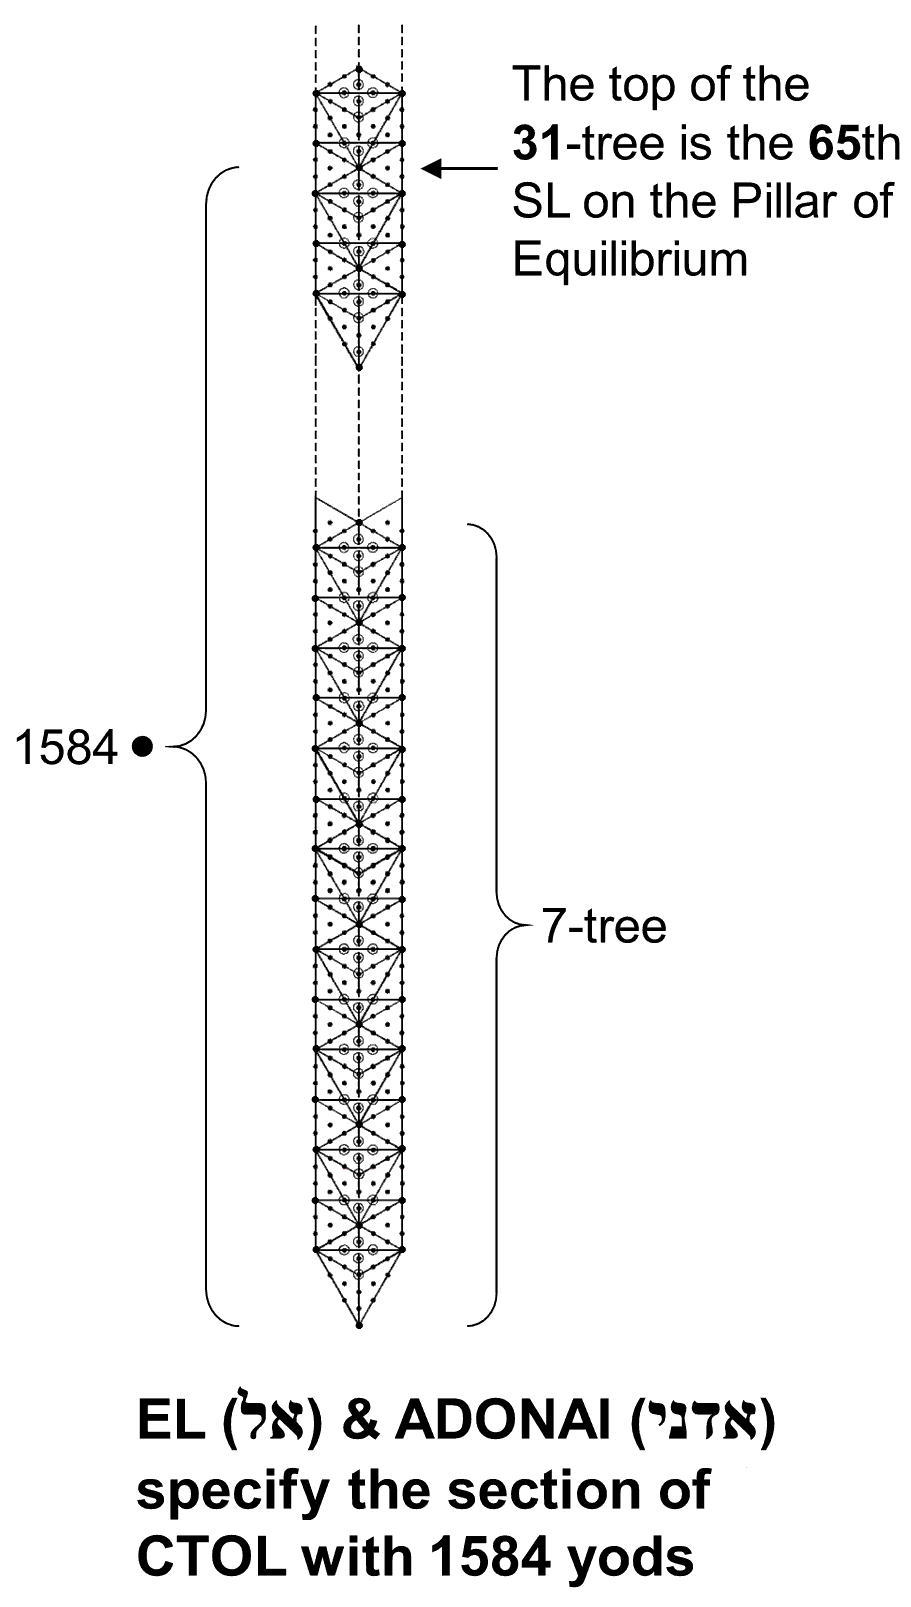 1584 yods up to level of top of 31-tree